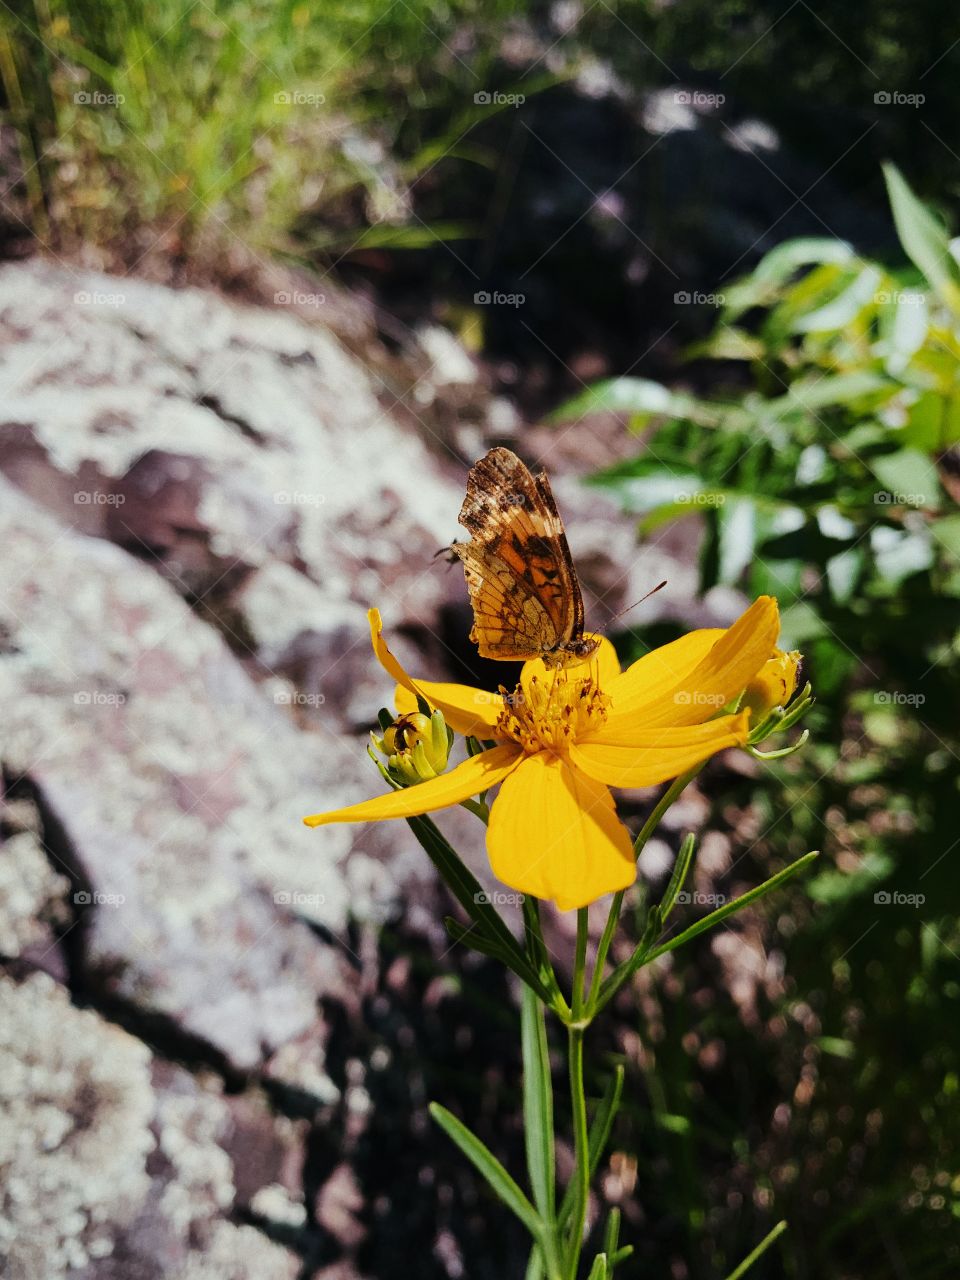 A butterfly captured at the perfect moment